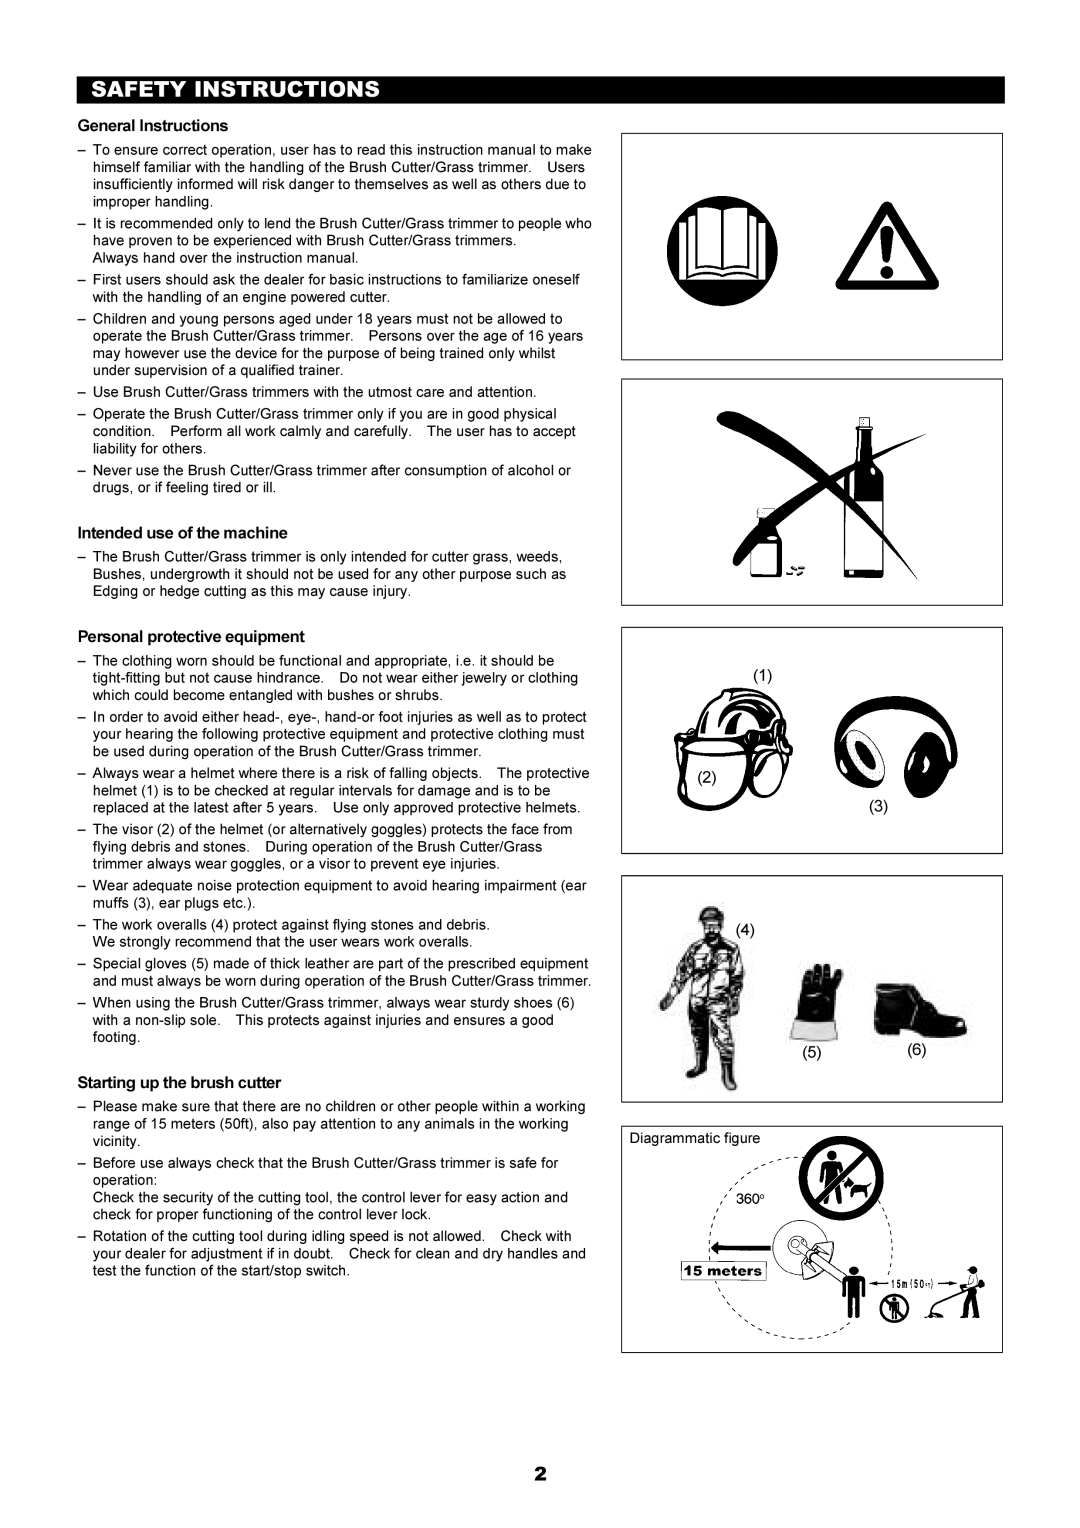 Makita EM4341 Safety Instructions, General Instructions, Intended use of the machine, Personal protective equipment 